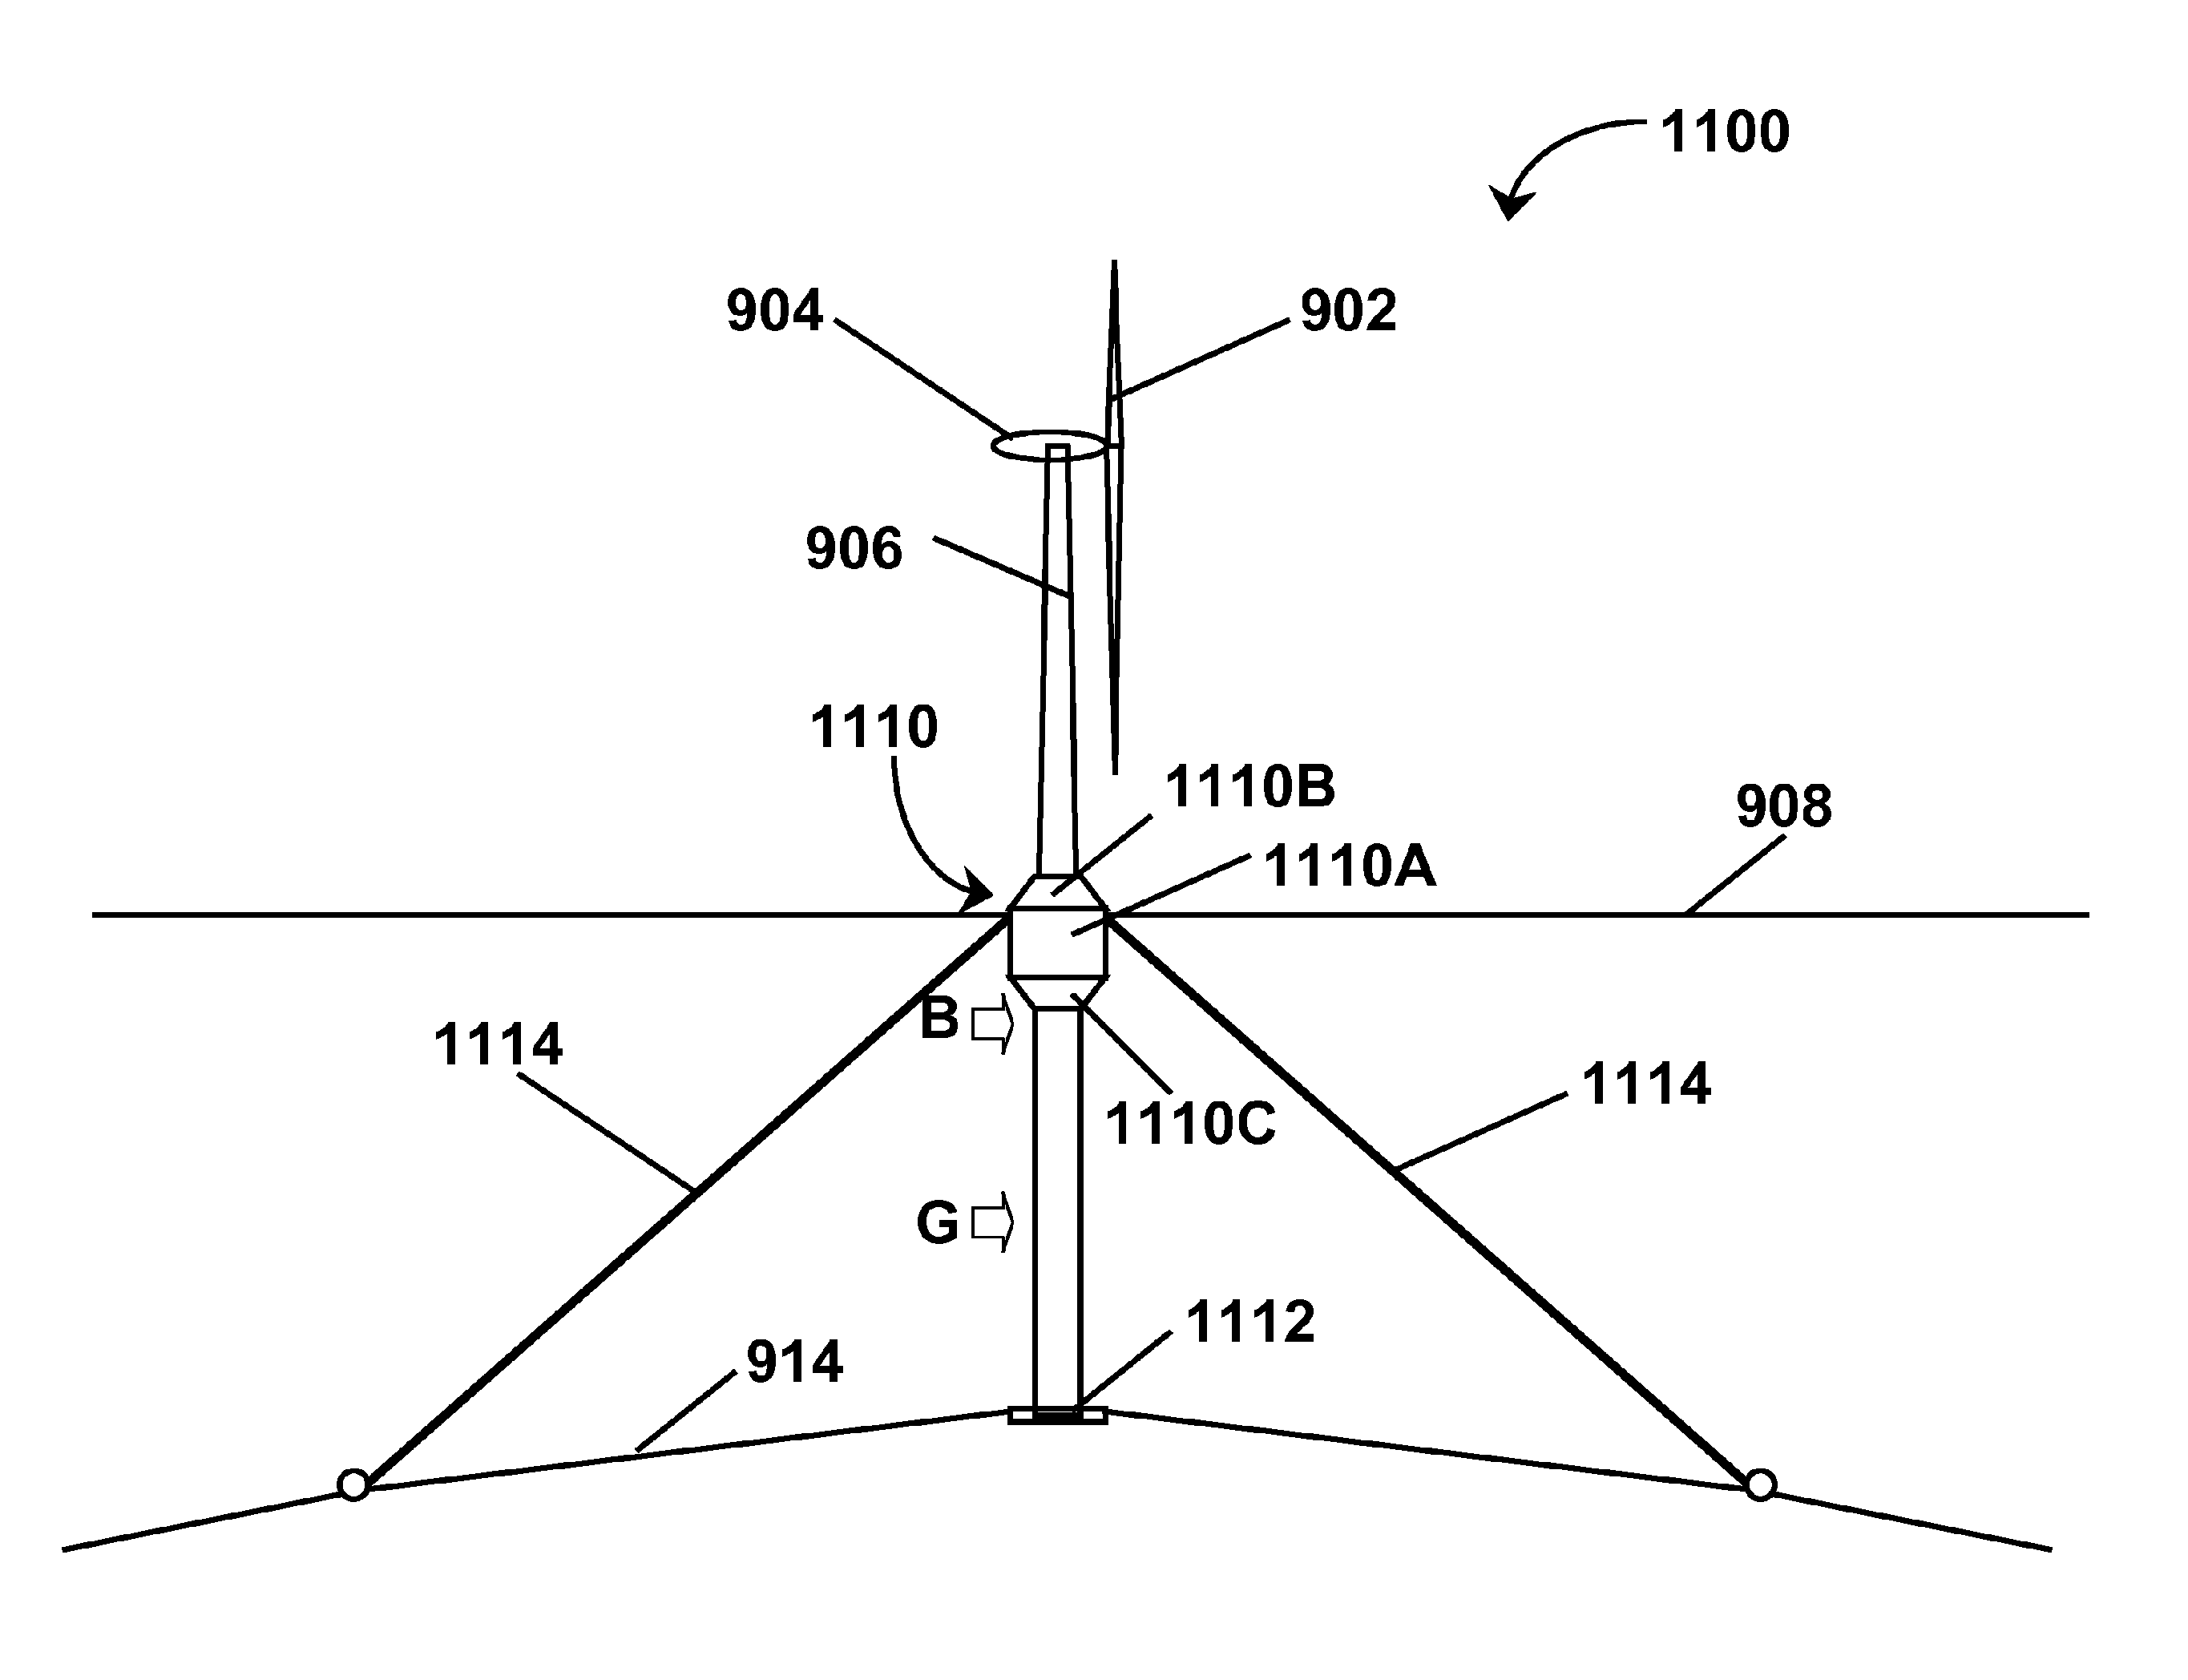 Power generation assemblies, and apparatus for use therewith